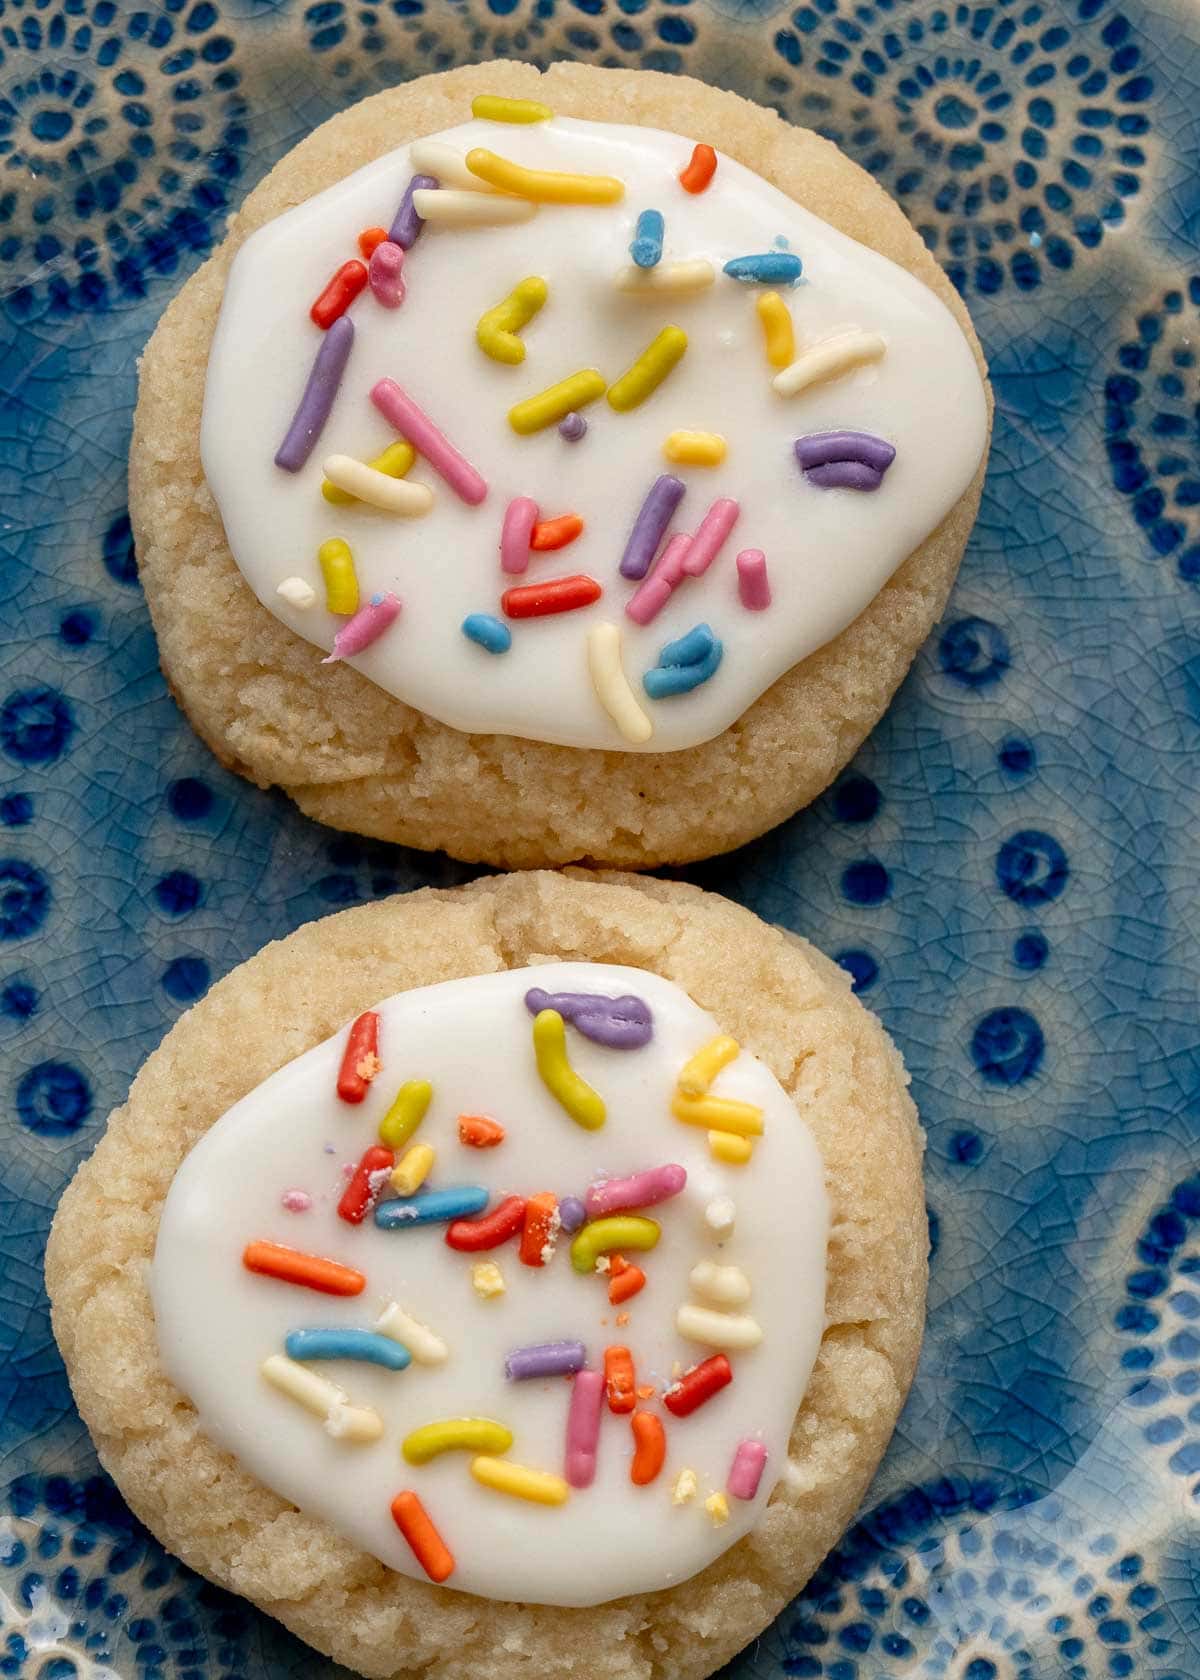 Been obsessing over these sugar cookies I made yesterday! It was